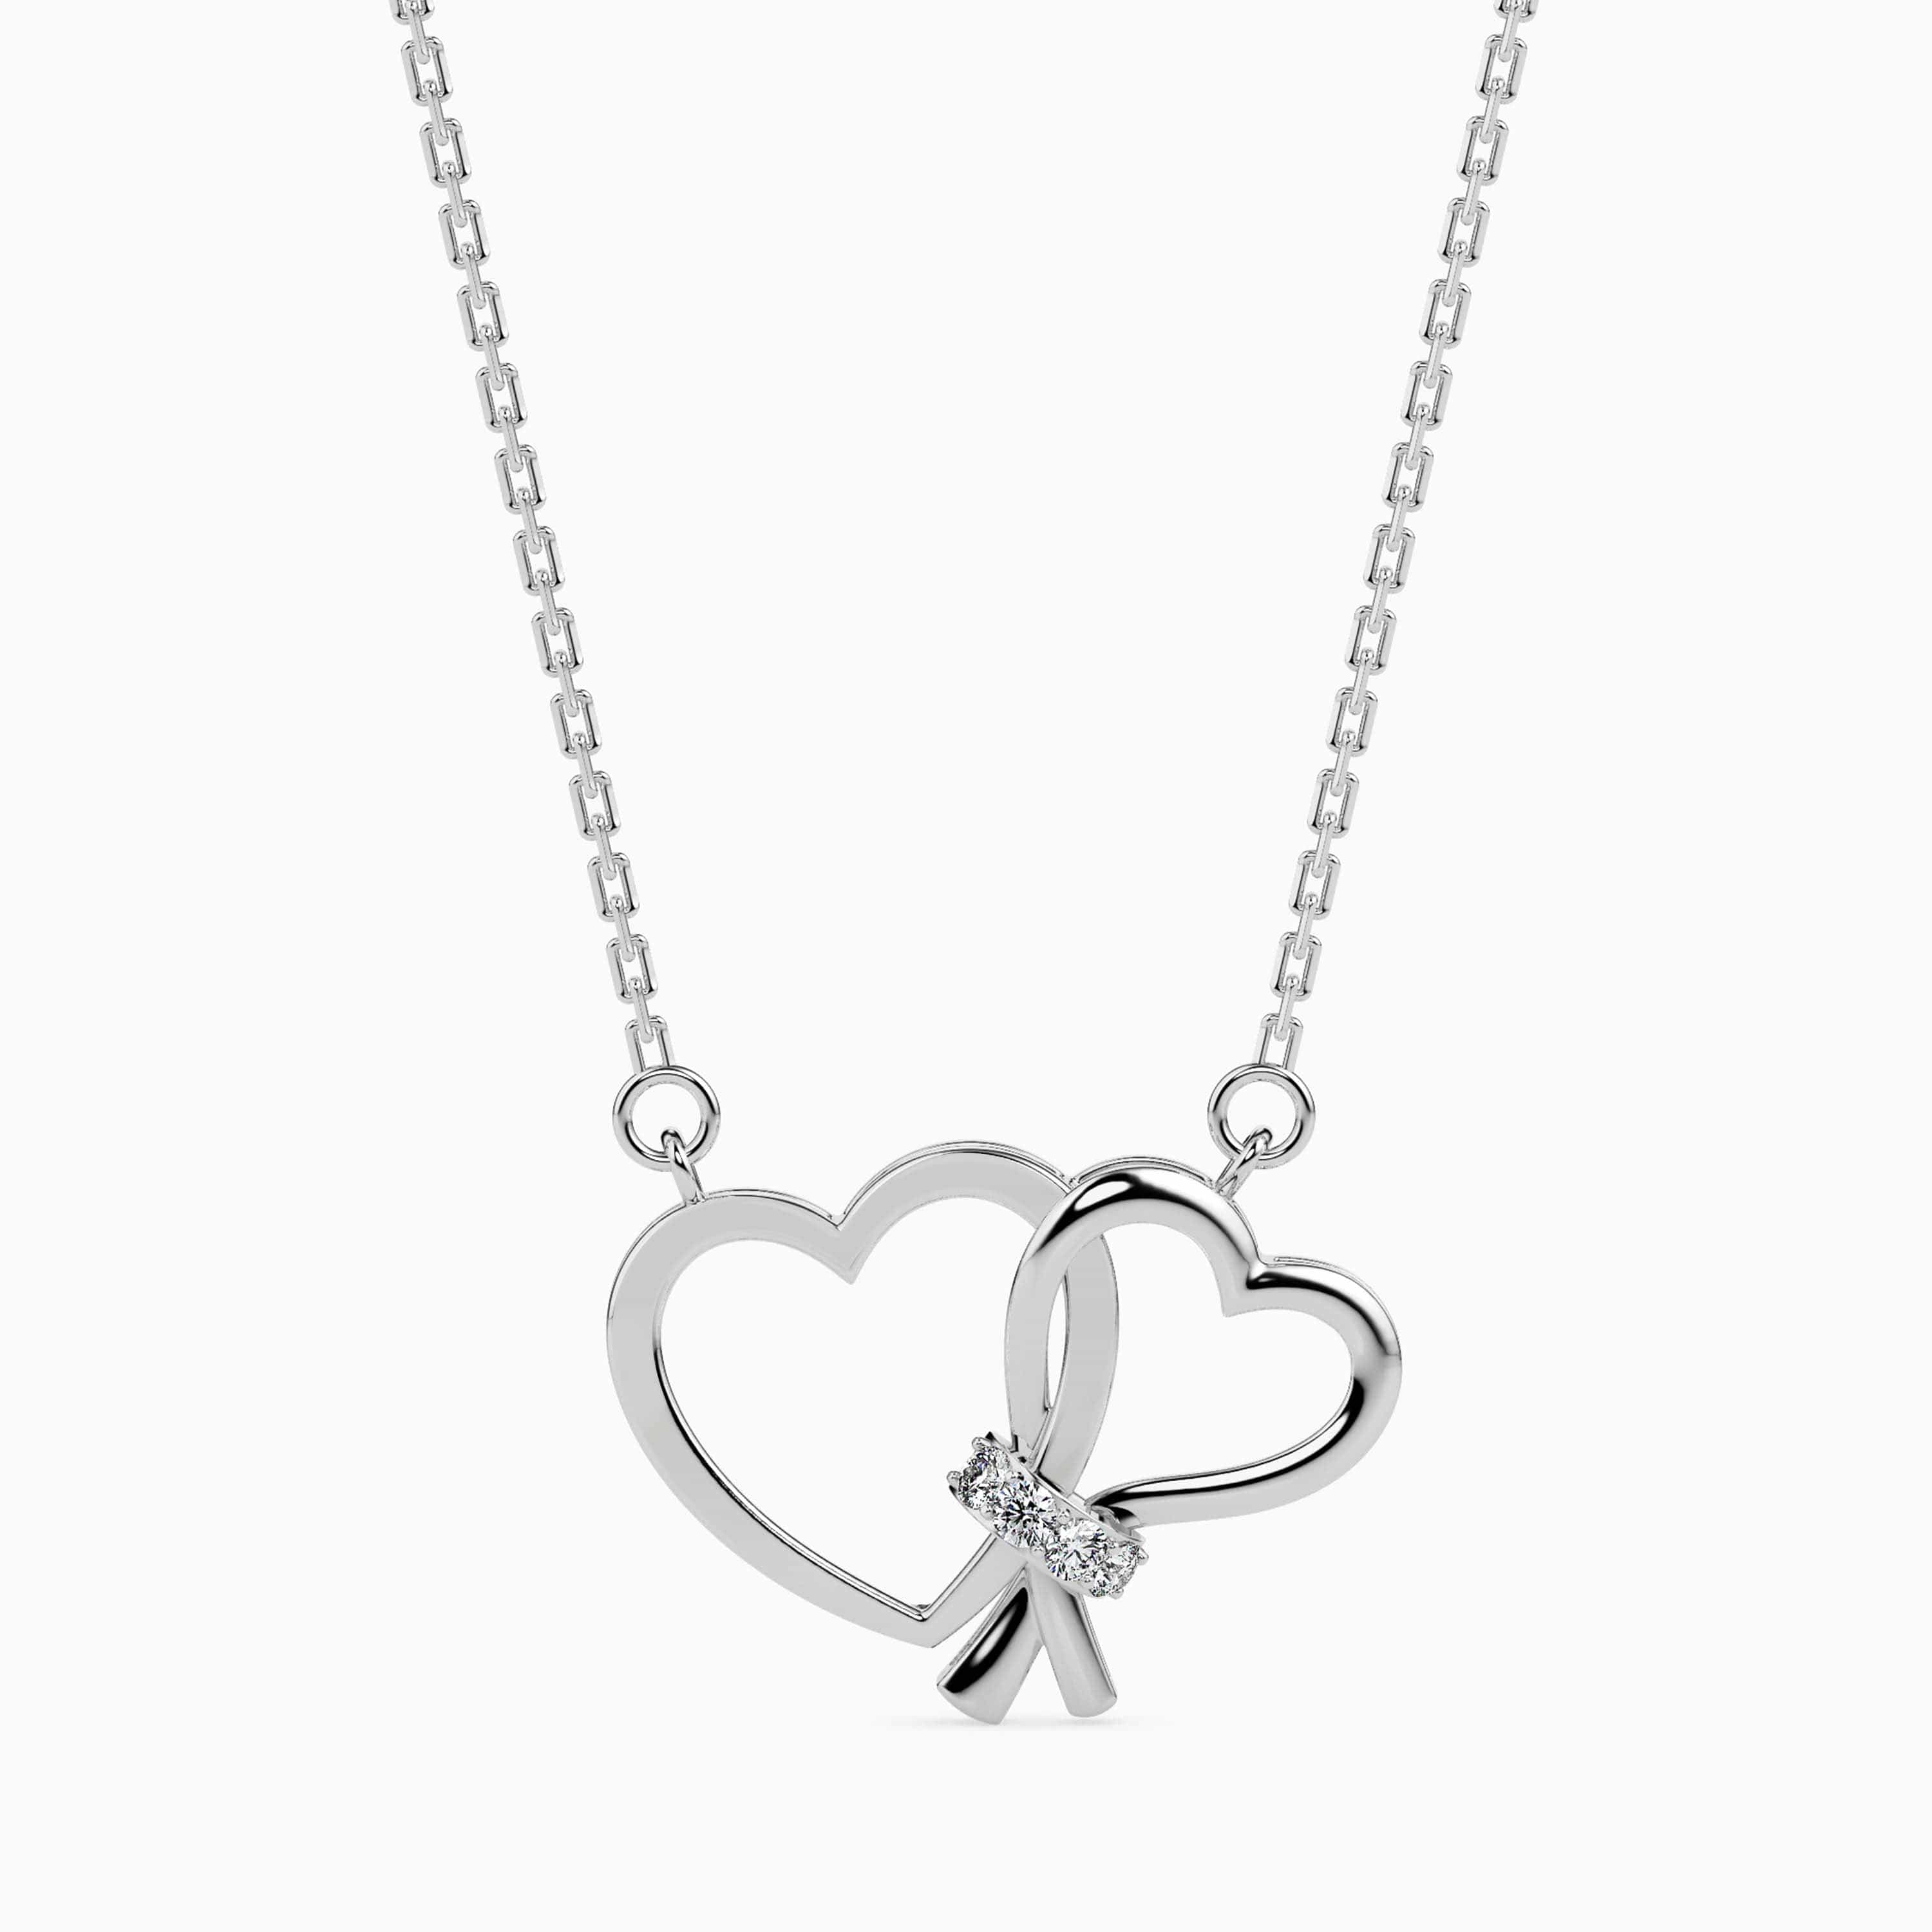 GIVA Anushka Sharma Zircon Curl Heart Necklace with Link Chain Silver  Online in India, Buy at Best Price from Firstcry.com - 12180756